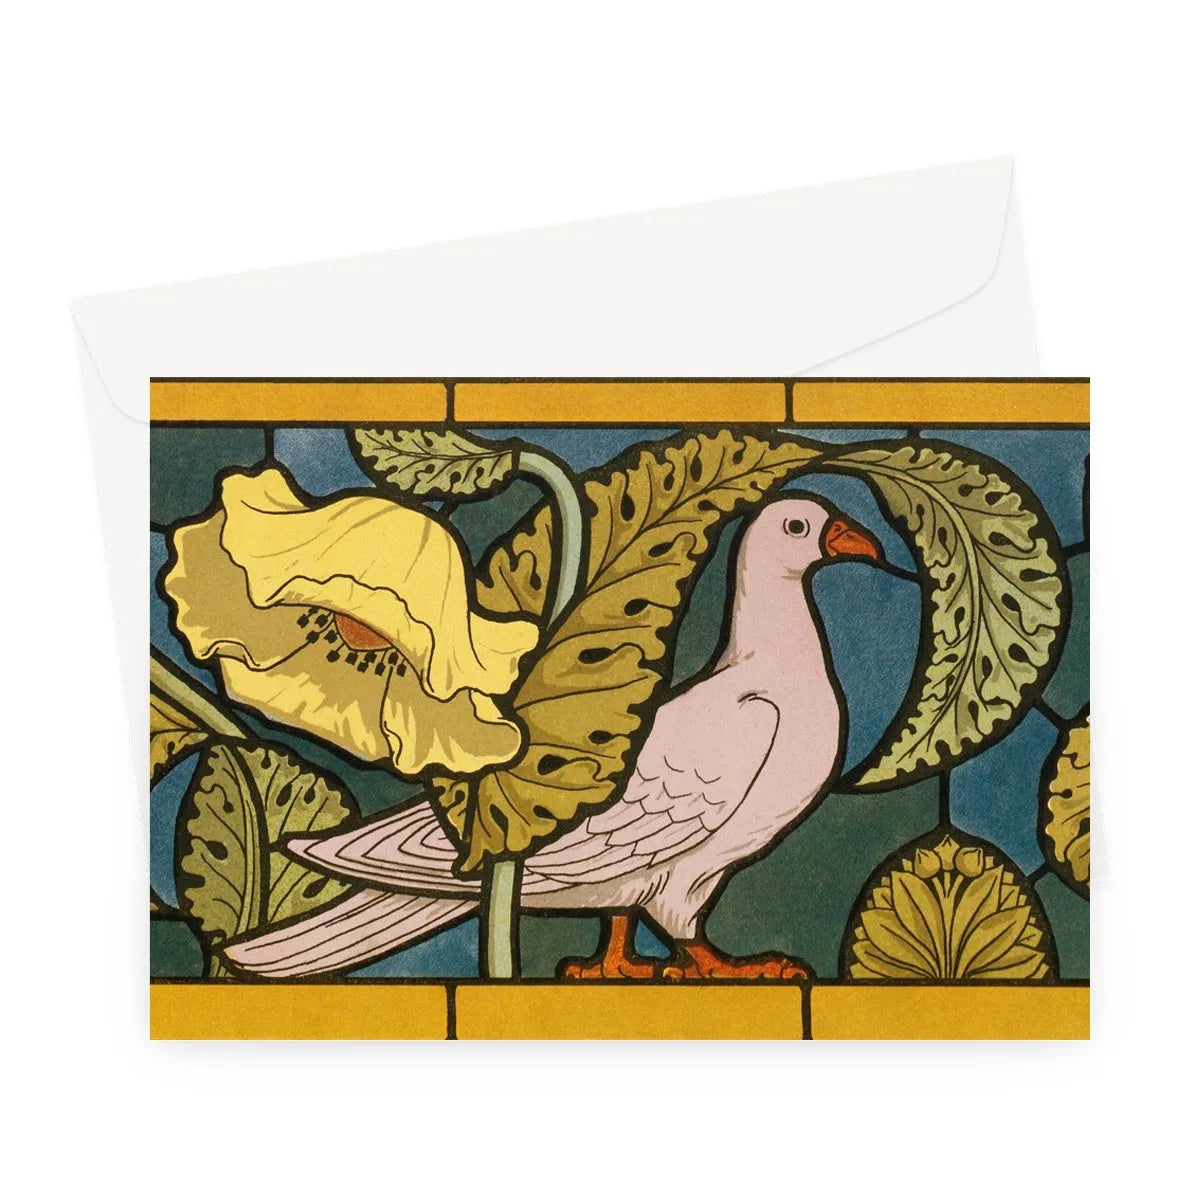 Pigeon Et Pavots By Maurice Pillard Verneuil Greeting Card - A5 Landscape / 10 x A5 Cards - Greeting & Note Cards